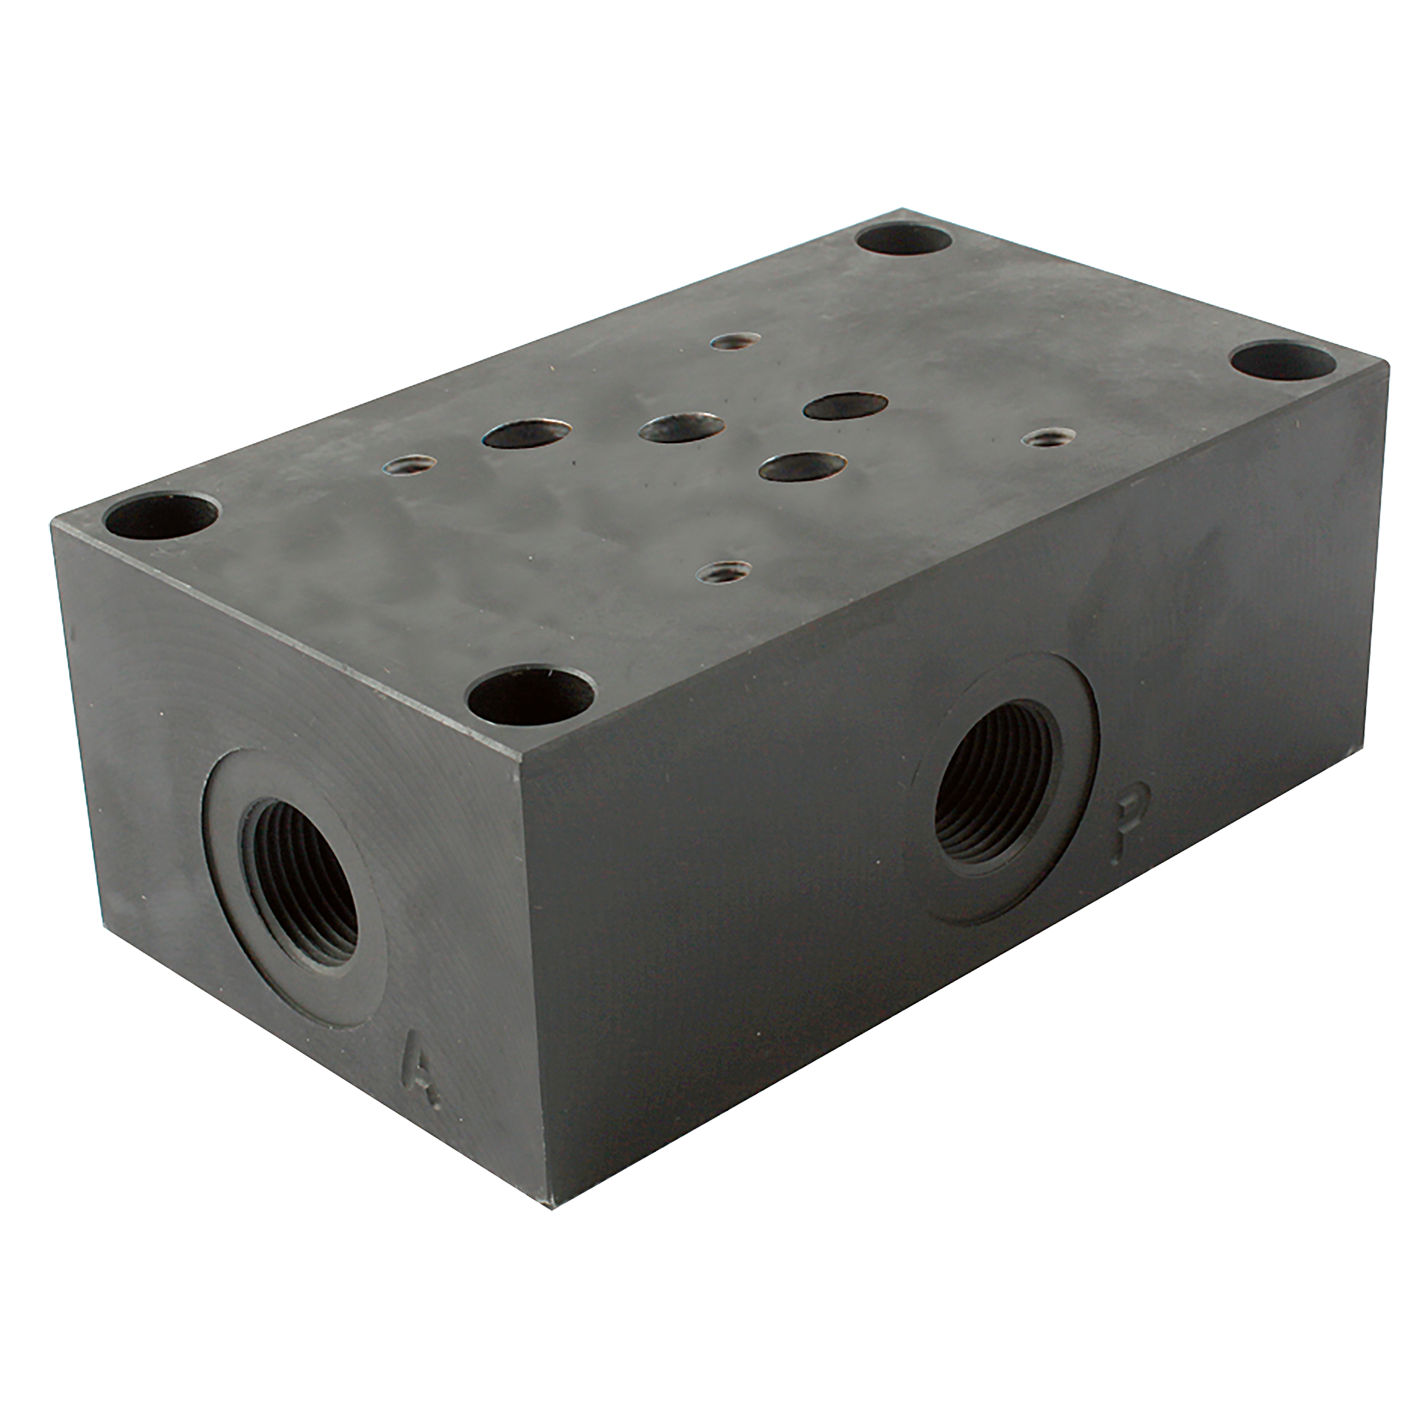 CETOP 5 SUBPLATE 1/2" BSP SIDE ENTRY